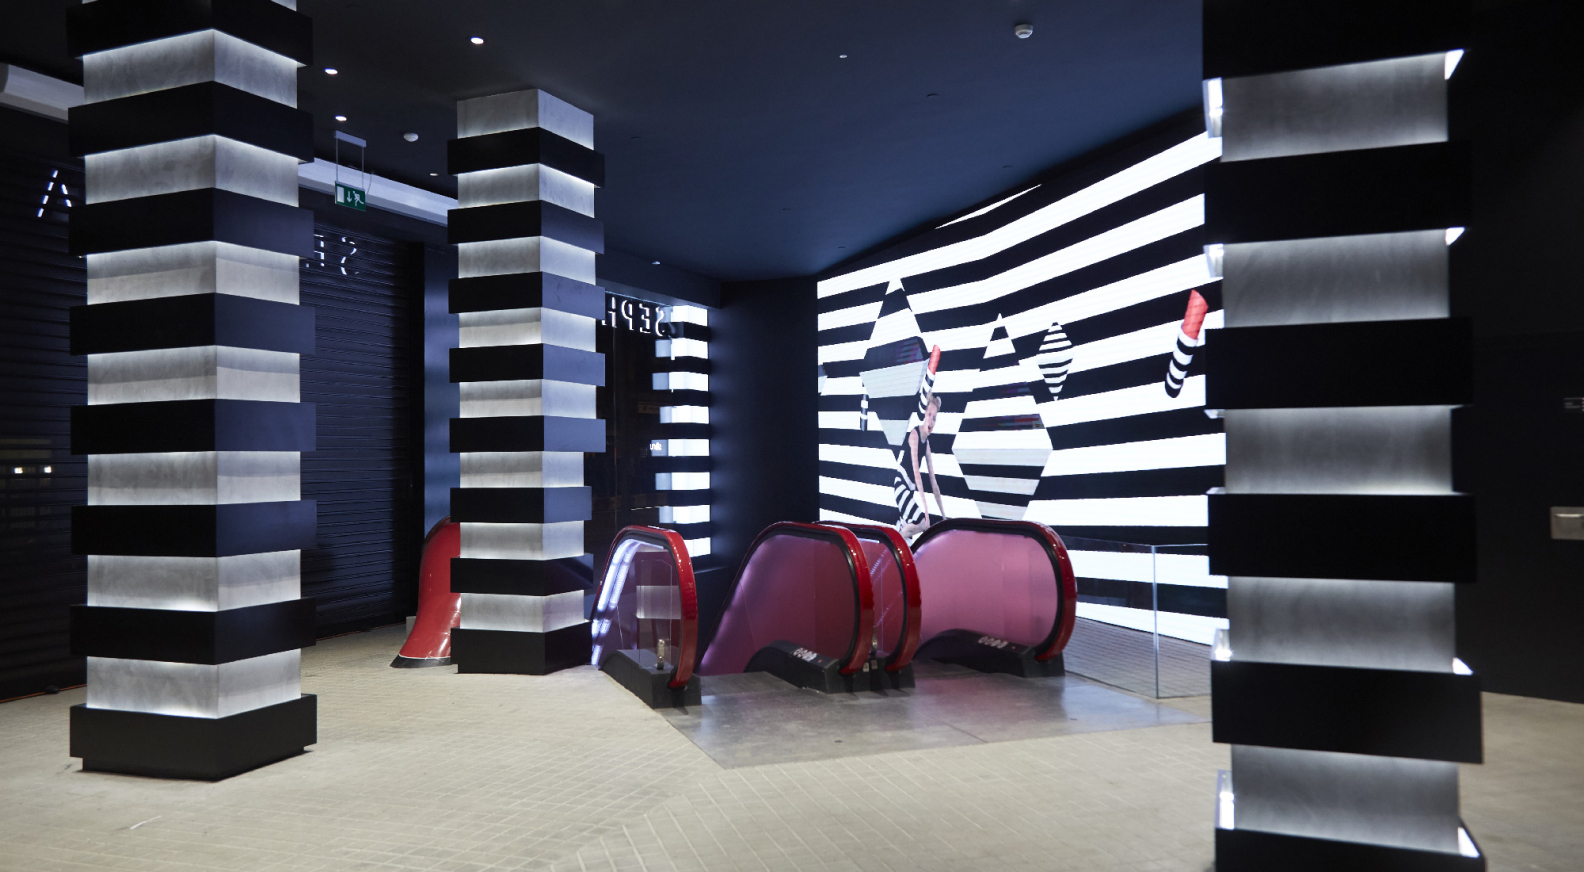 Inside Sephora - Our Heritage